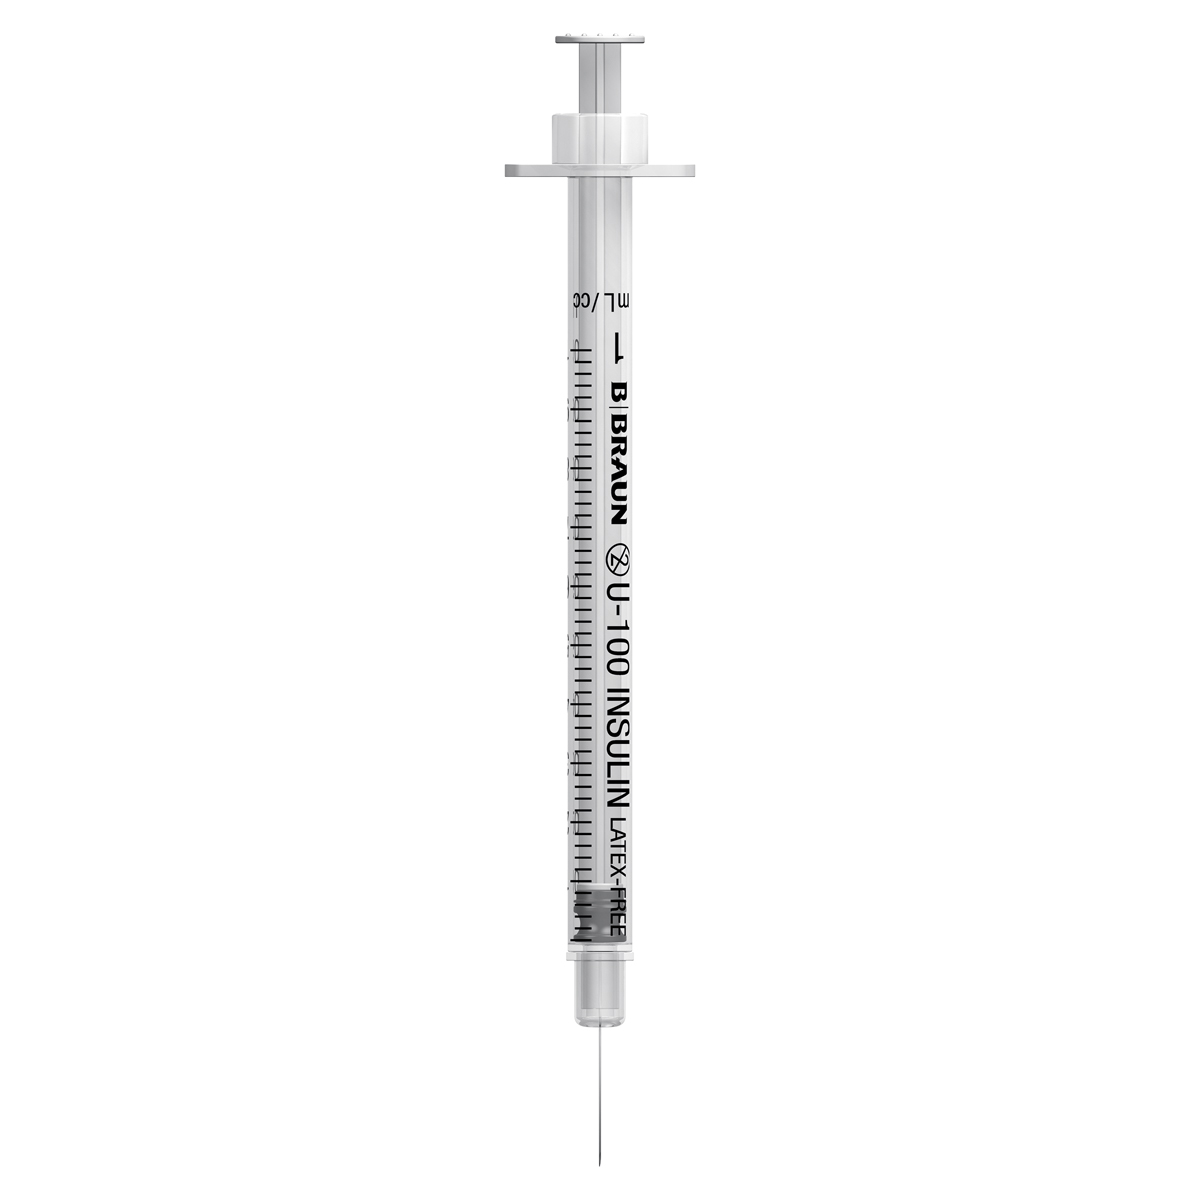 BBraun Omnican 1ml 30G insulin syringe (ind blister packed). (Temp out of stock 